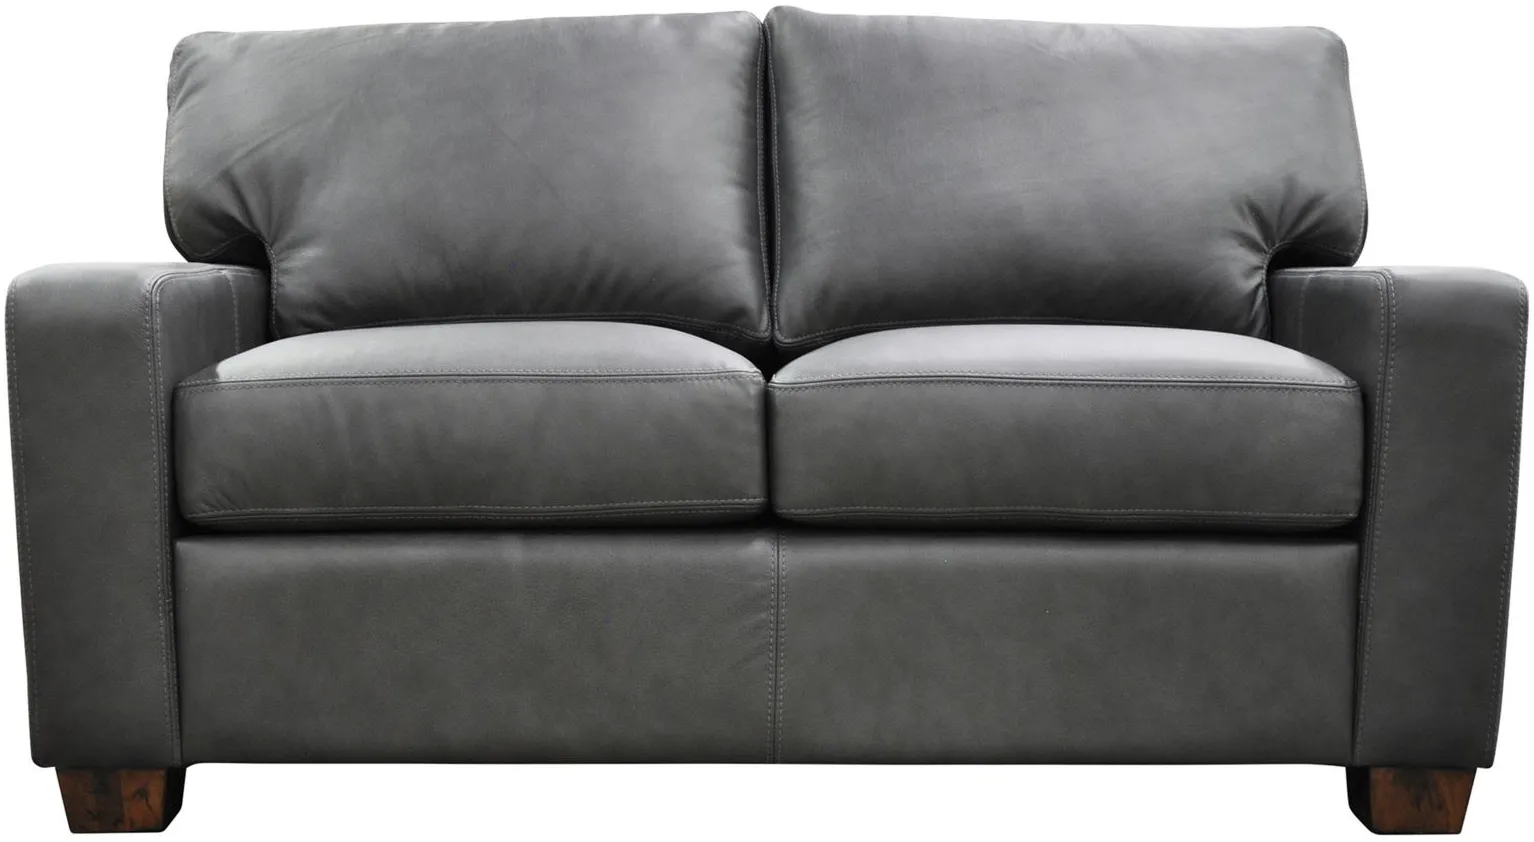 Albany Loveseat in Urban Graphite by Omnia Leather